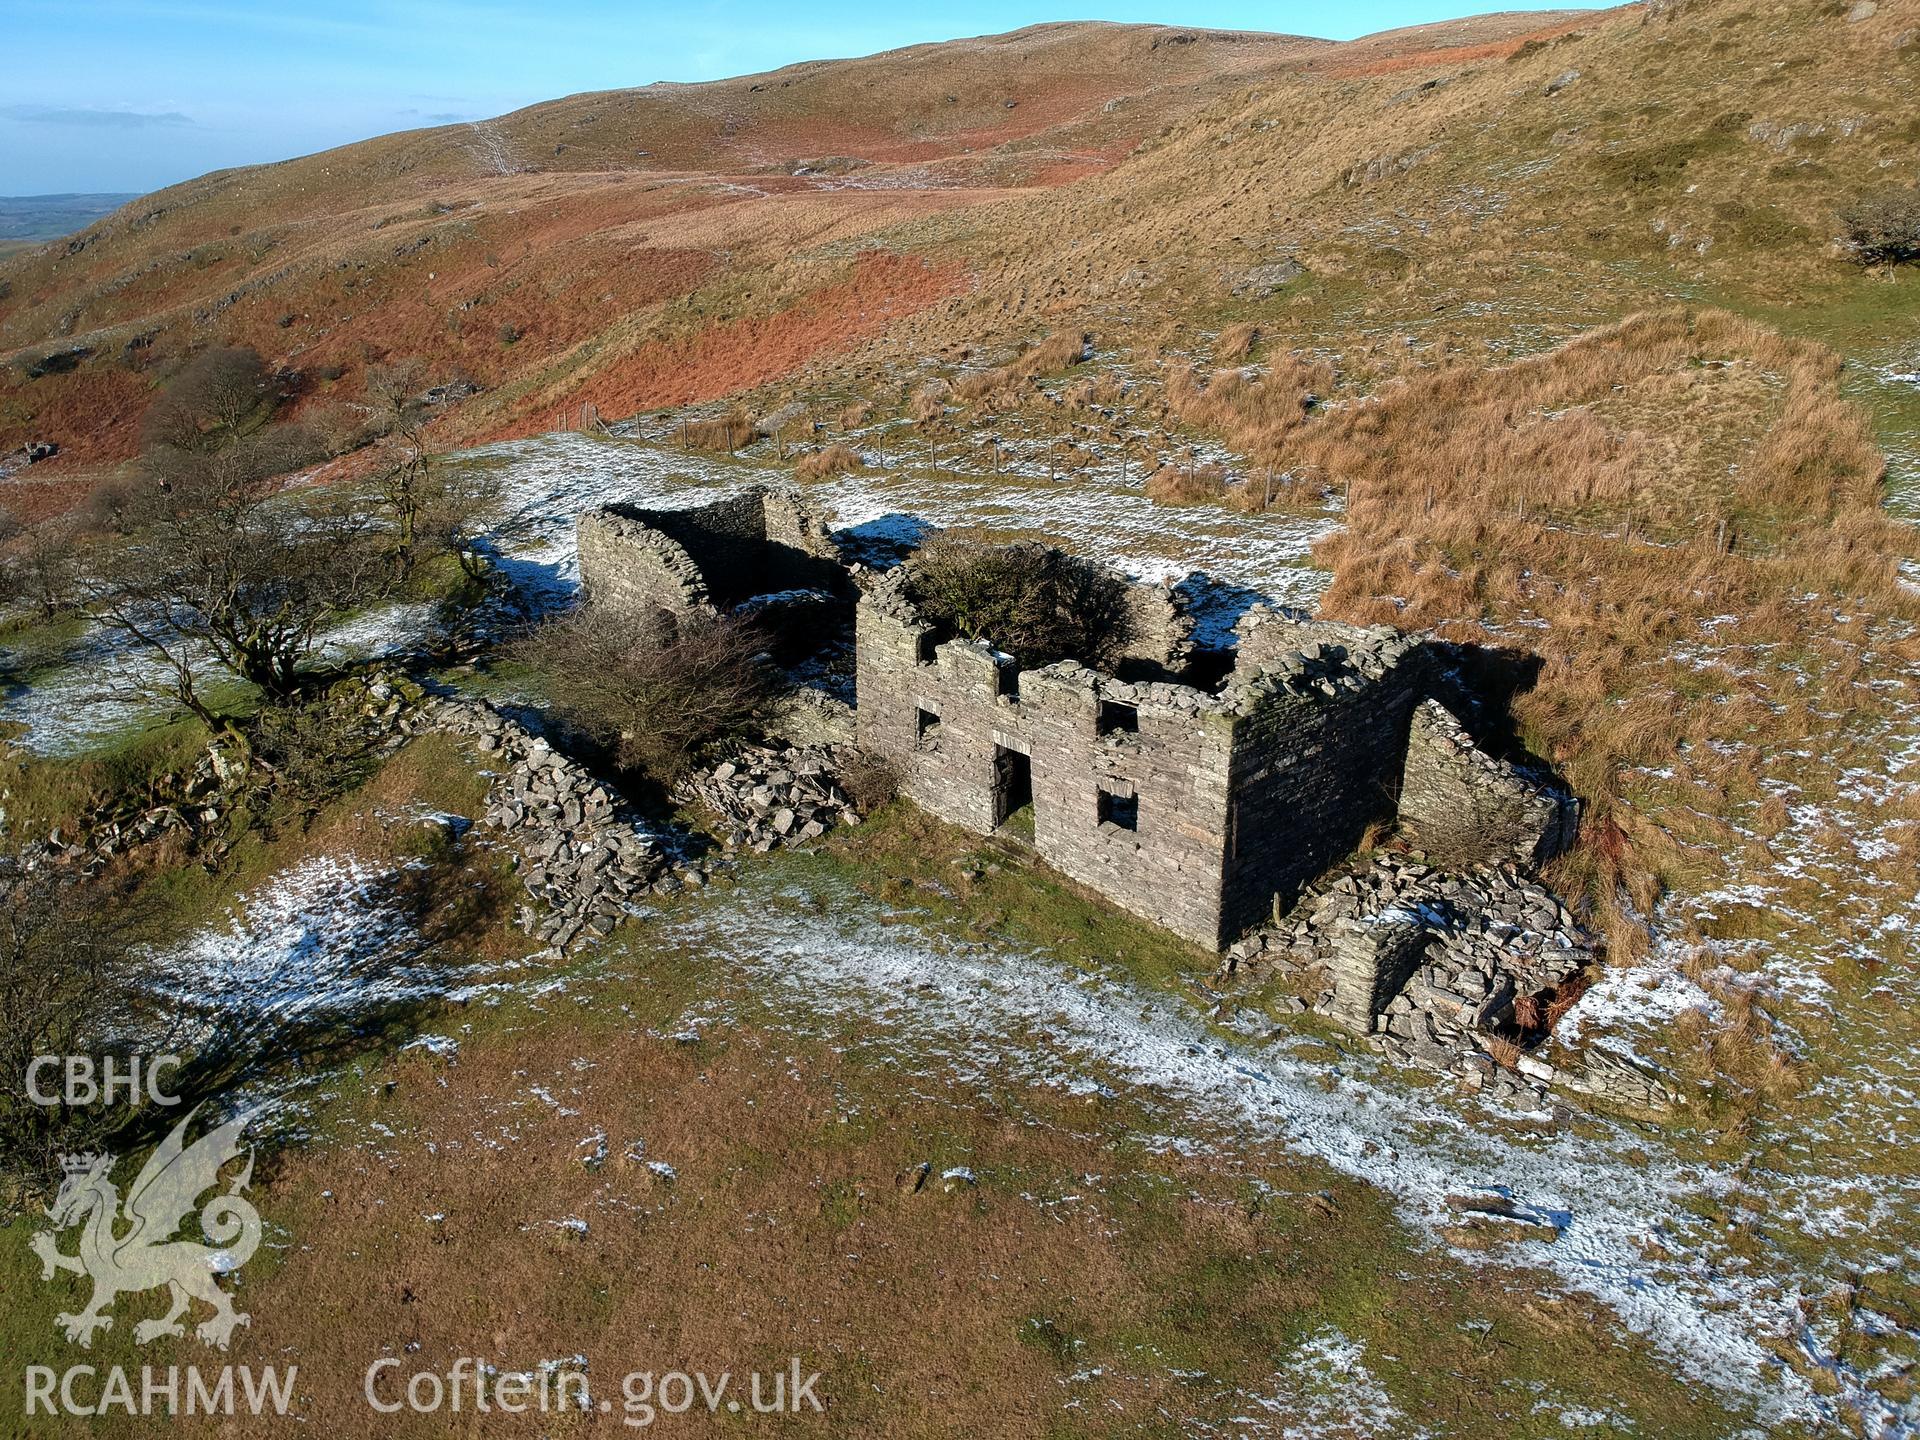 Detailed aerial view showing exterior front elevation of deserted, roofless, dry-stone walled Ty-Canol house at Ty-Canol farmstead, Creigen Ddu. Colour photograph taken by Paul R. Davis on 17th January 2019.